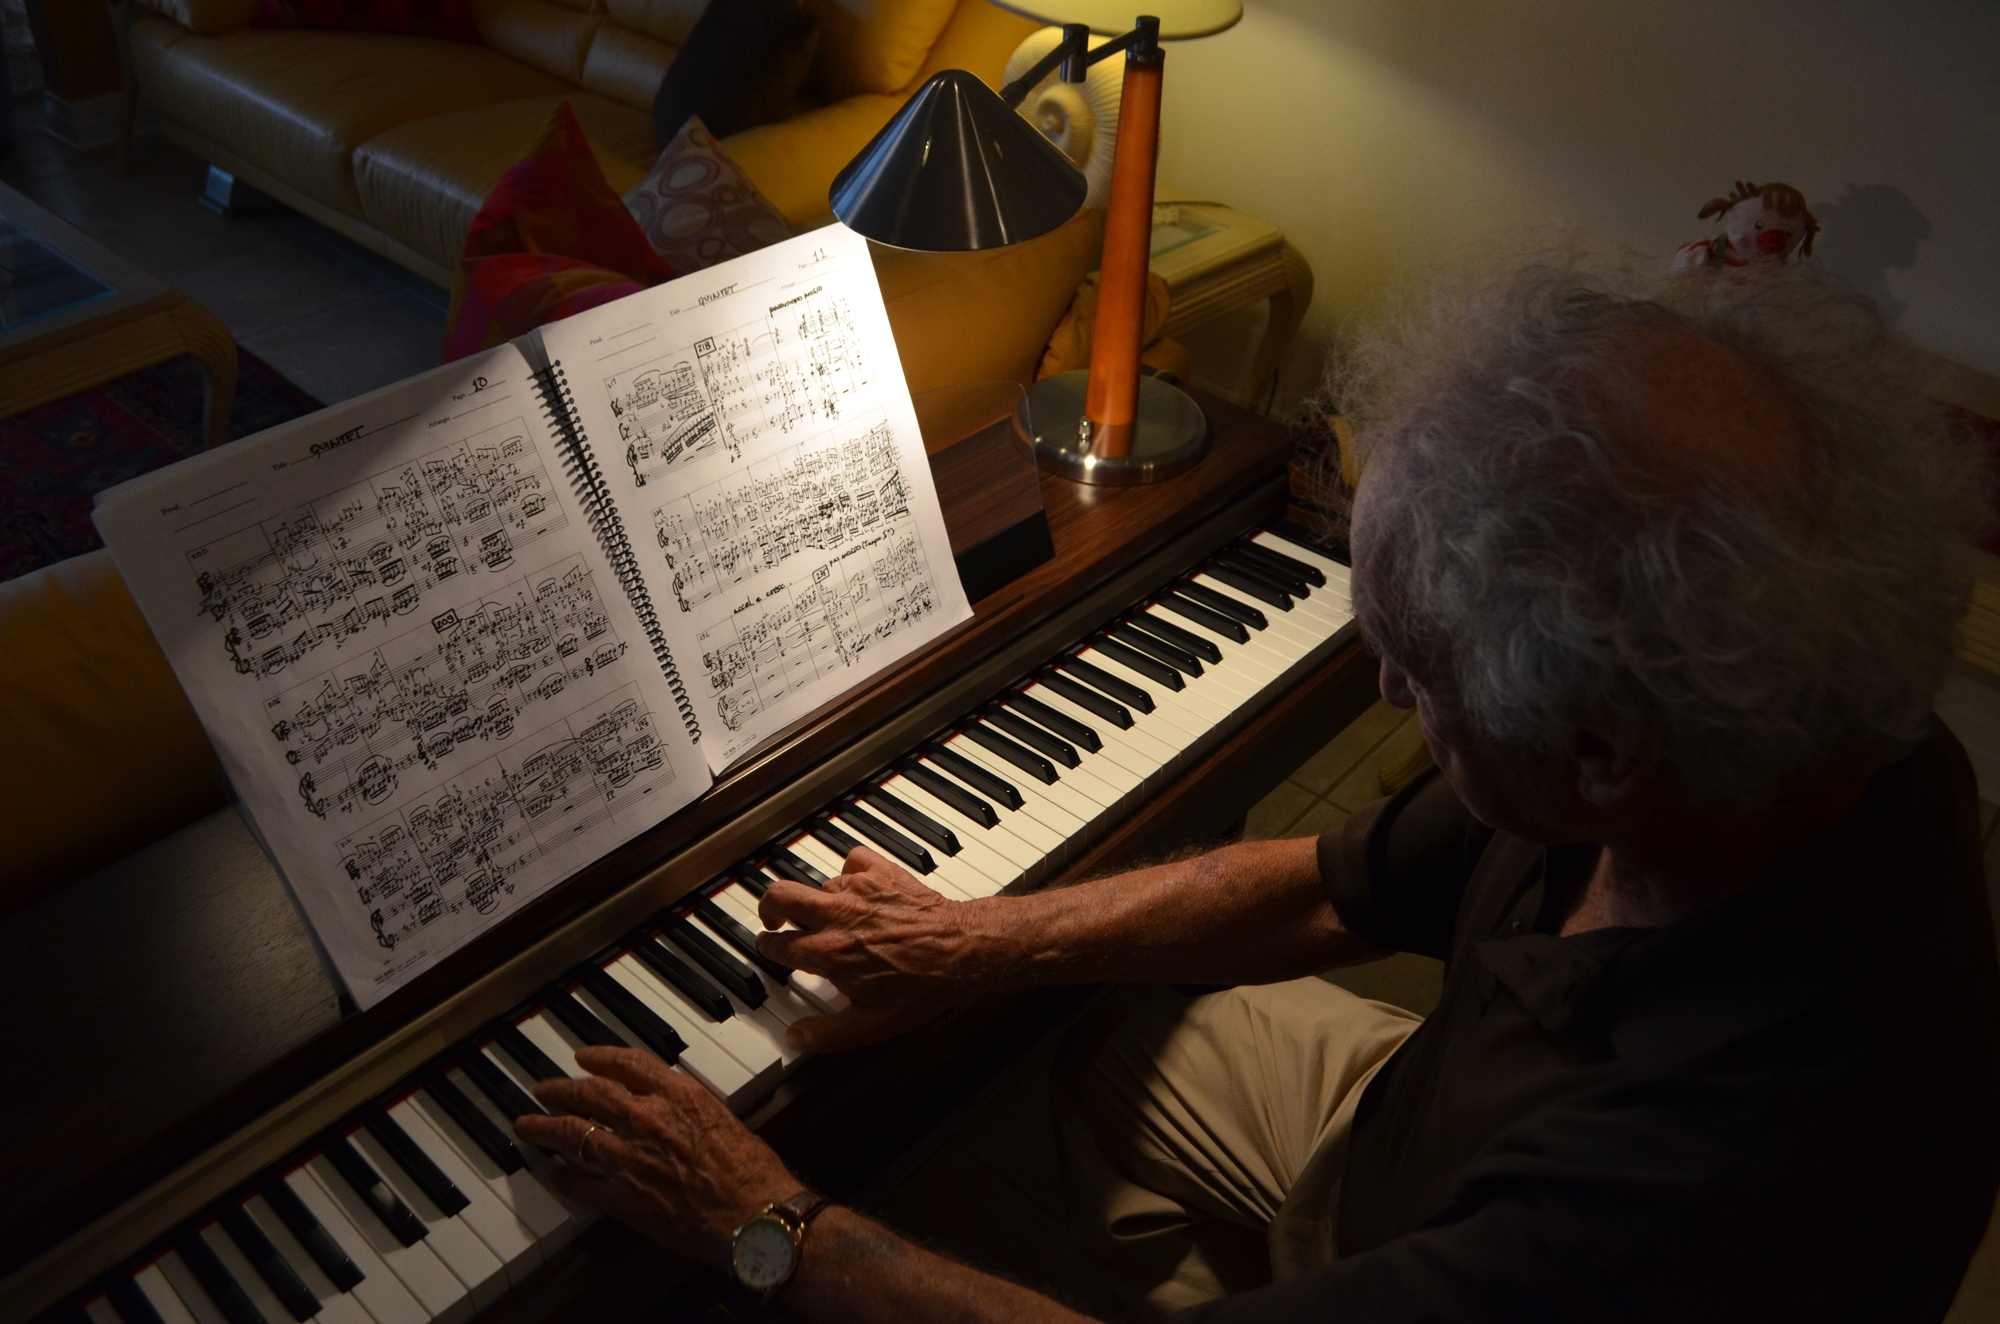 Jerry Bilik spends hours writing and arranging scores at his keyboard piano in his living room in Pelican Cove.